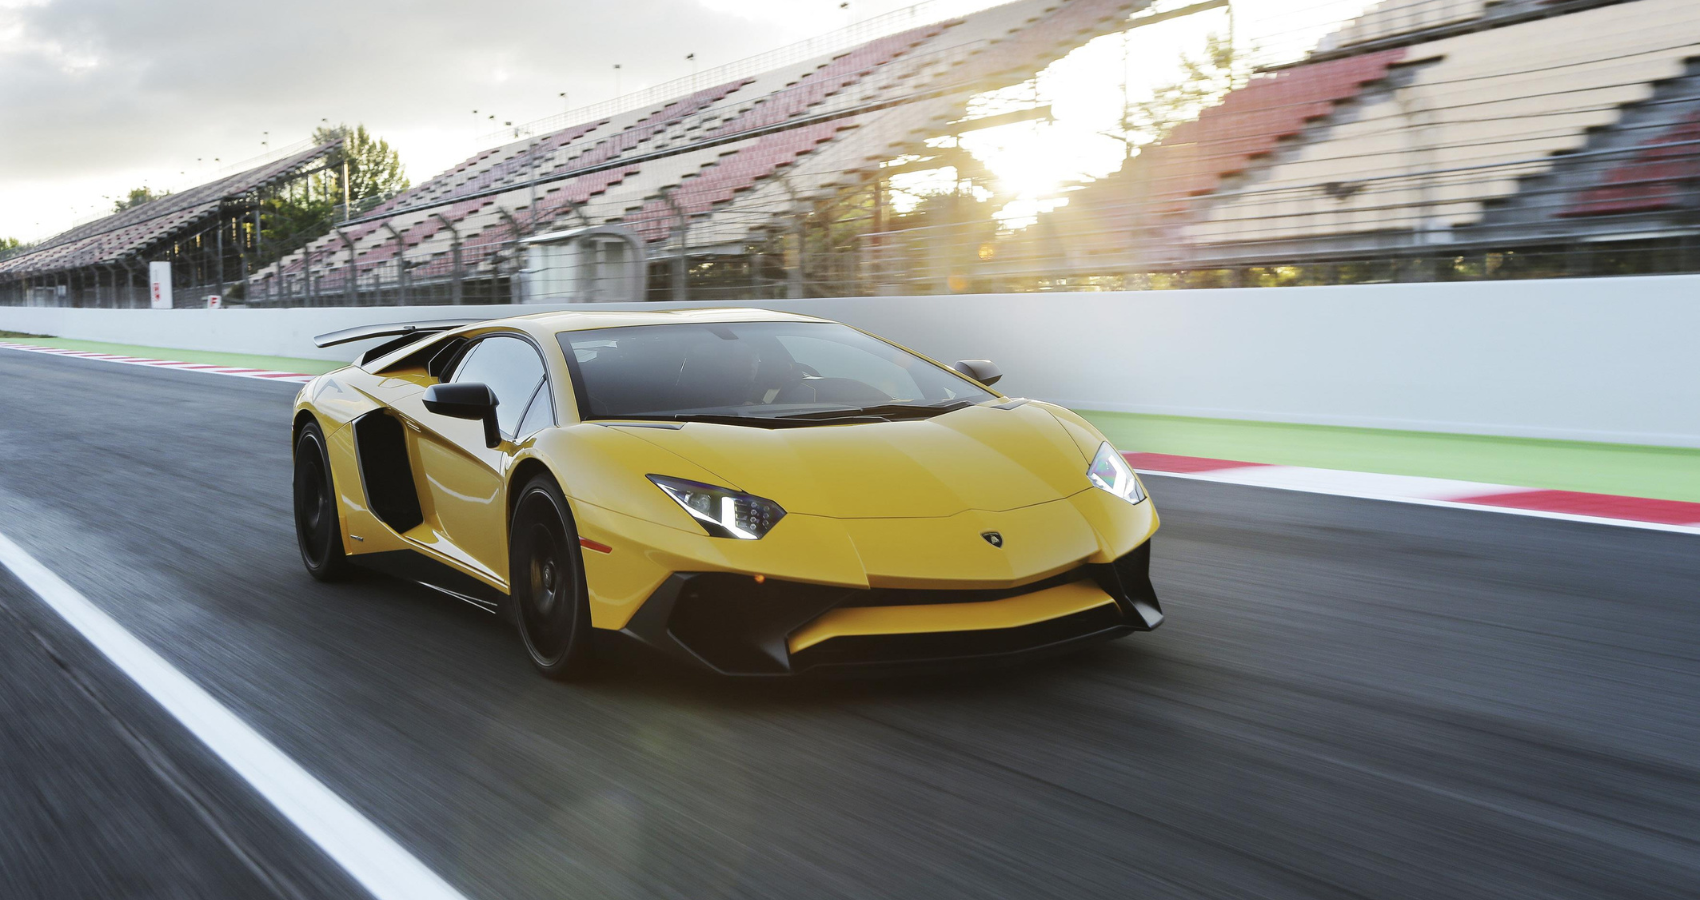 Yellow Lamborghini Aventador LP750-4 SV on a race track passing the stand